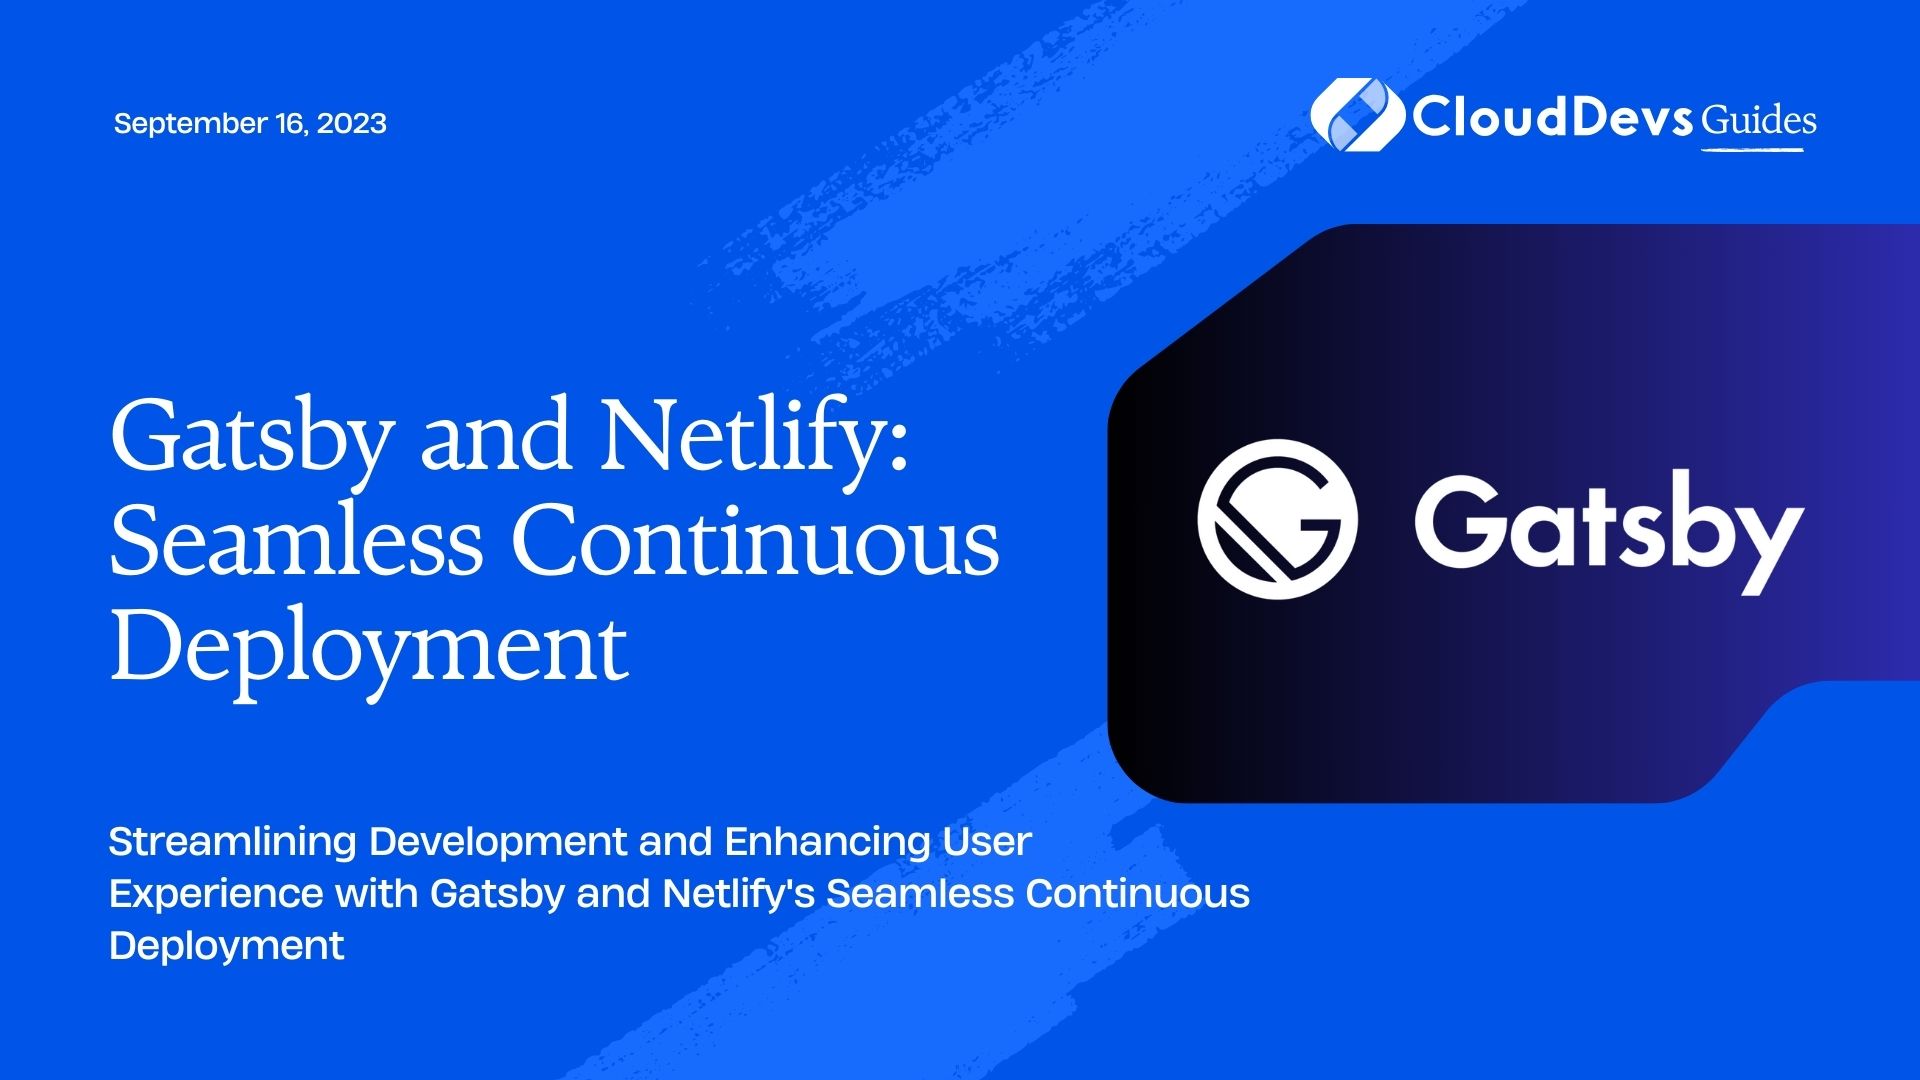 Gatsby and Netlify: Seamless Continuous Deployment